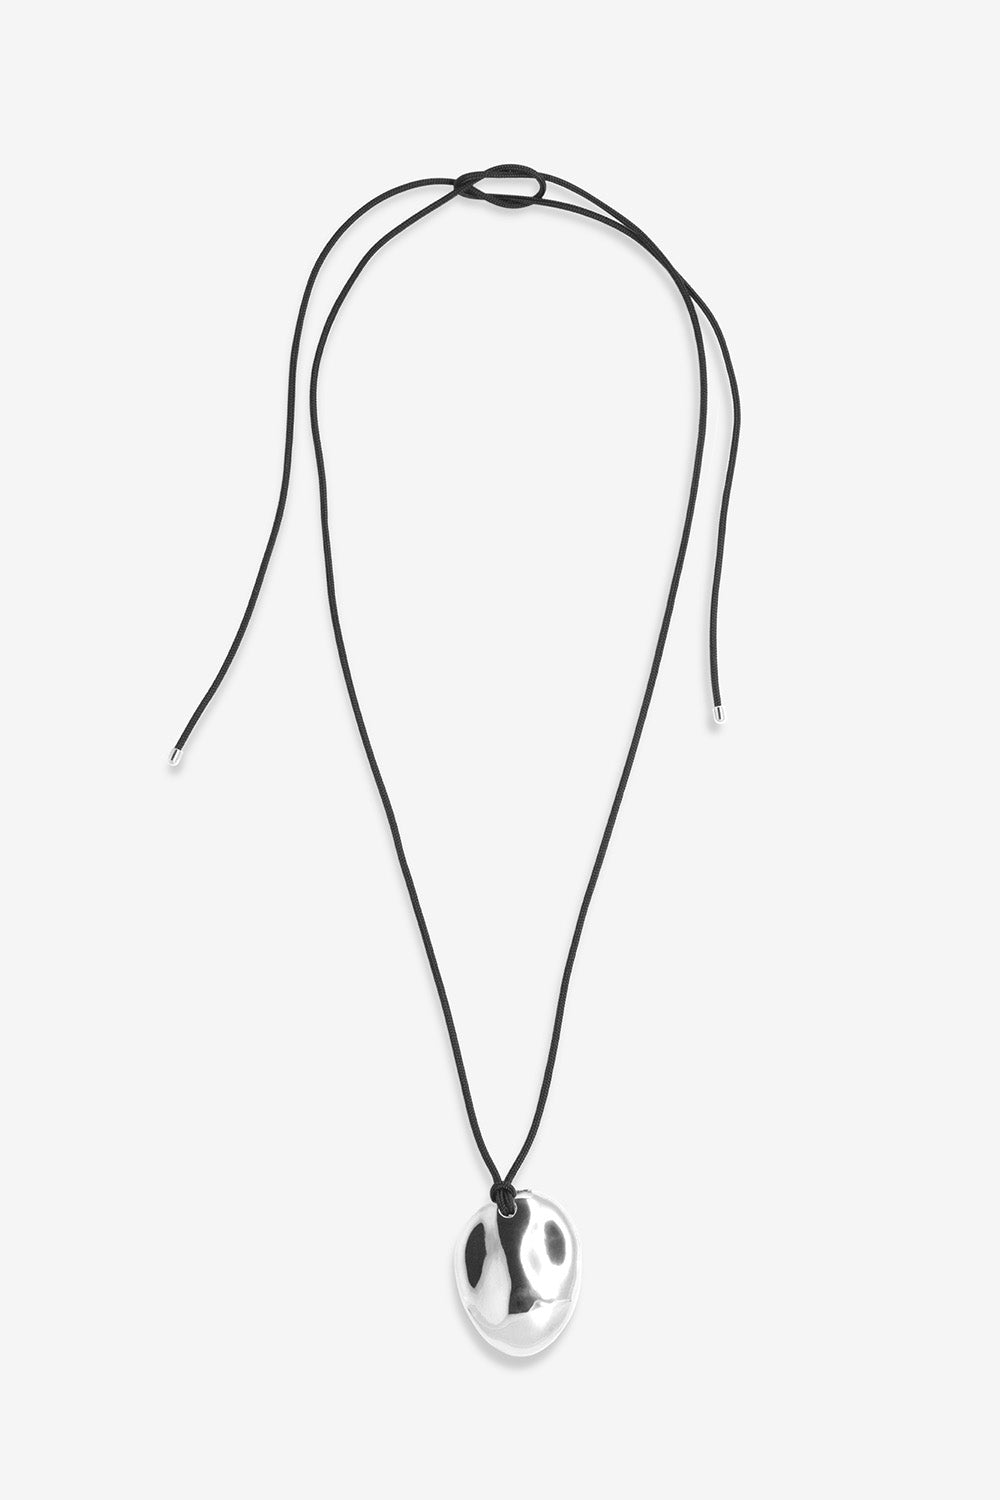 Flash Jewellery Dylan Dome Necklace with black cord in Sterling Silver